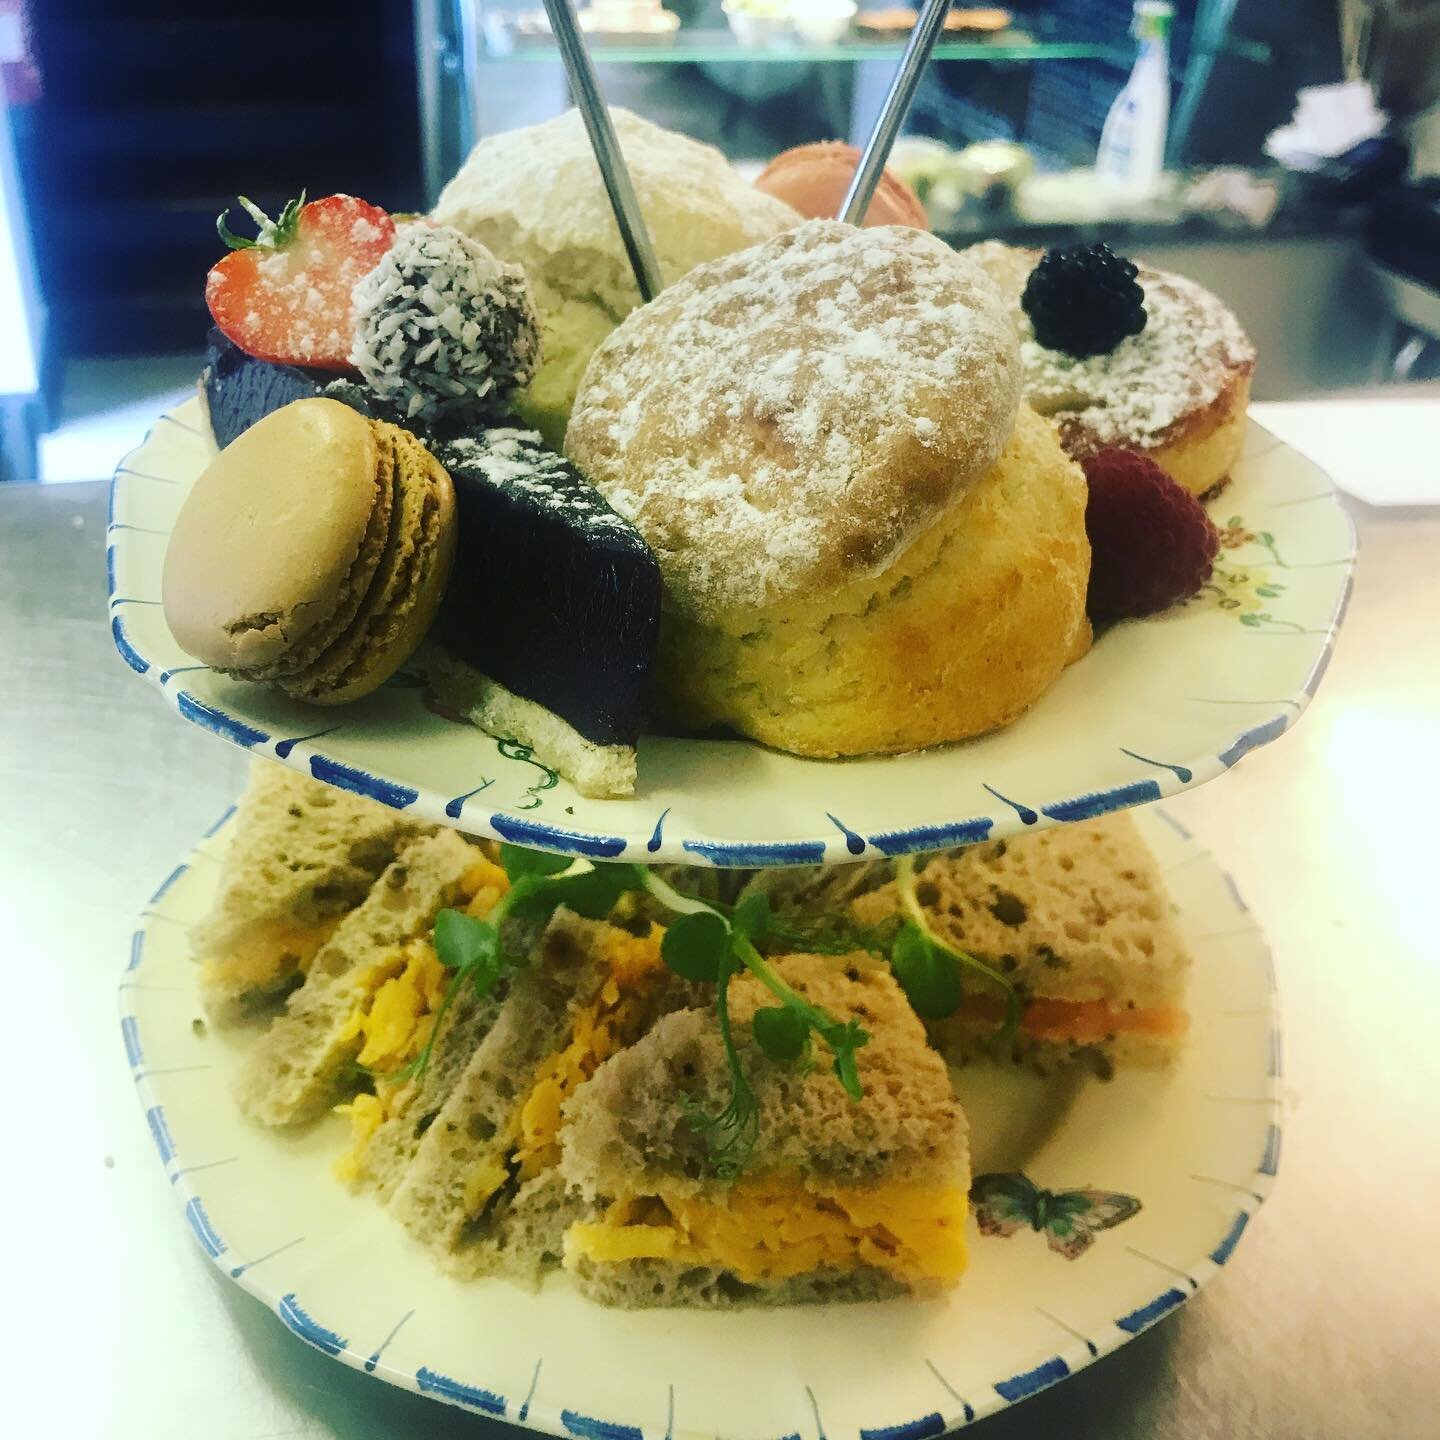 Afternoon tea delivered to your door.
Pop over to the website.
Orders in before 11am for tomorrow and then it&rsquo;s Thursday.
#mrsbs #afternoontea